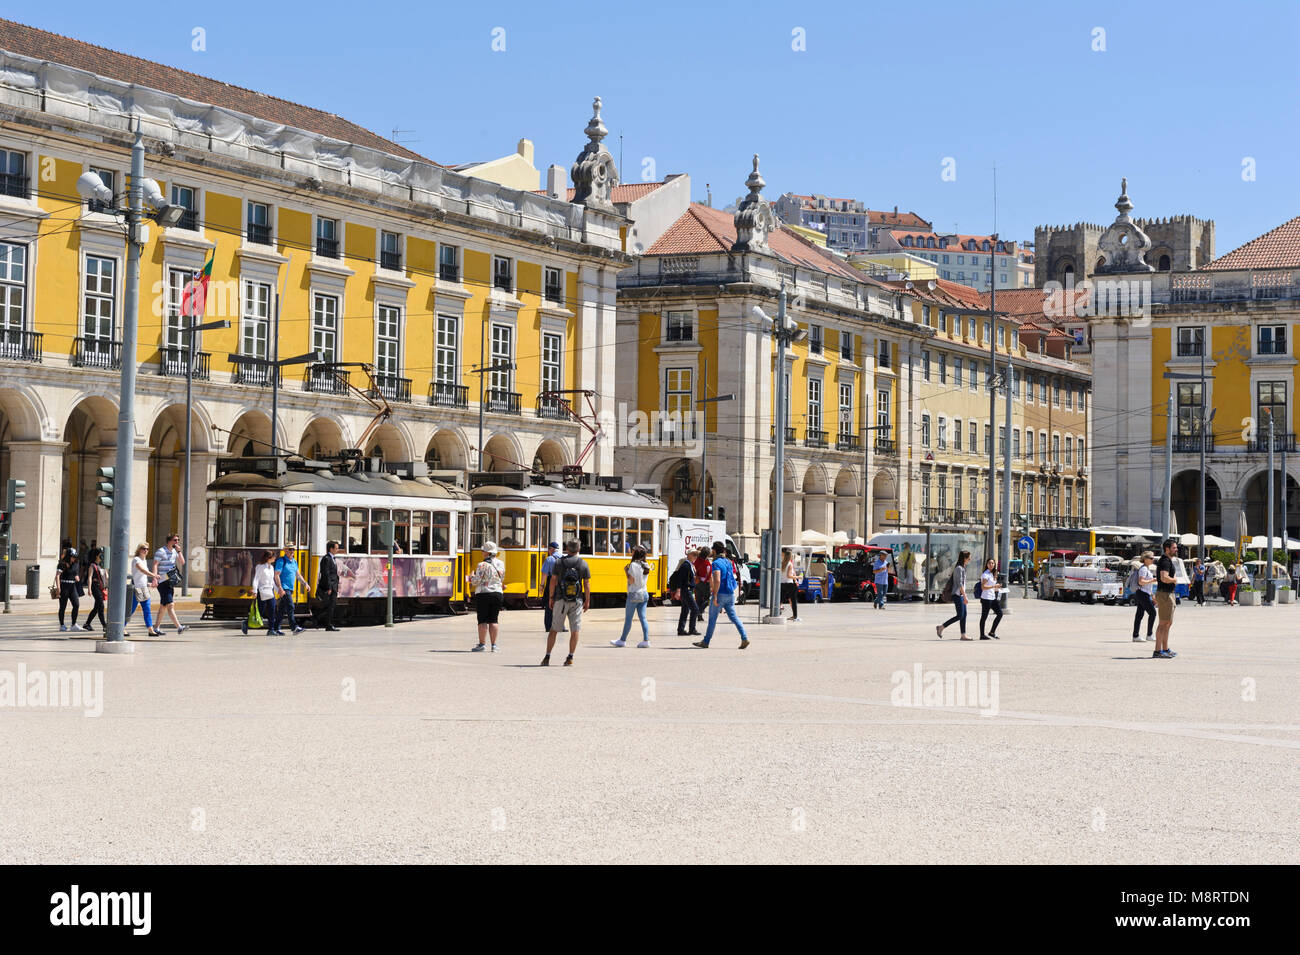 Daily activity at the Praça do Comércio known as Commerce Square, Lisbon, Portugal Stock Photo